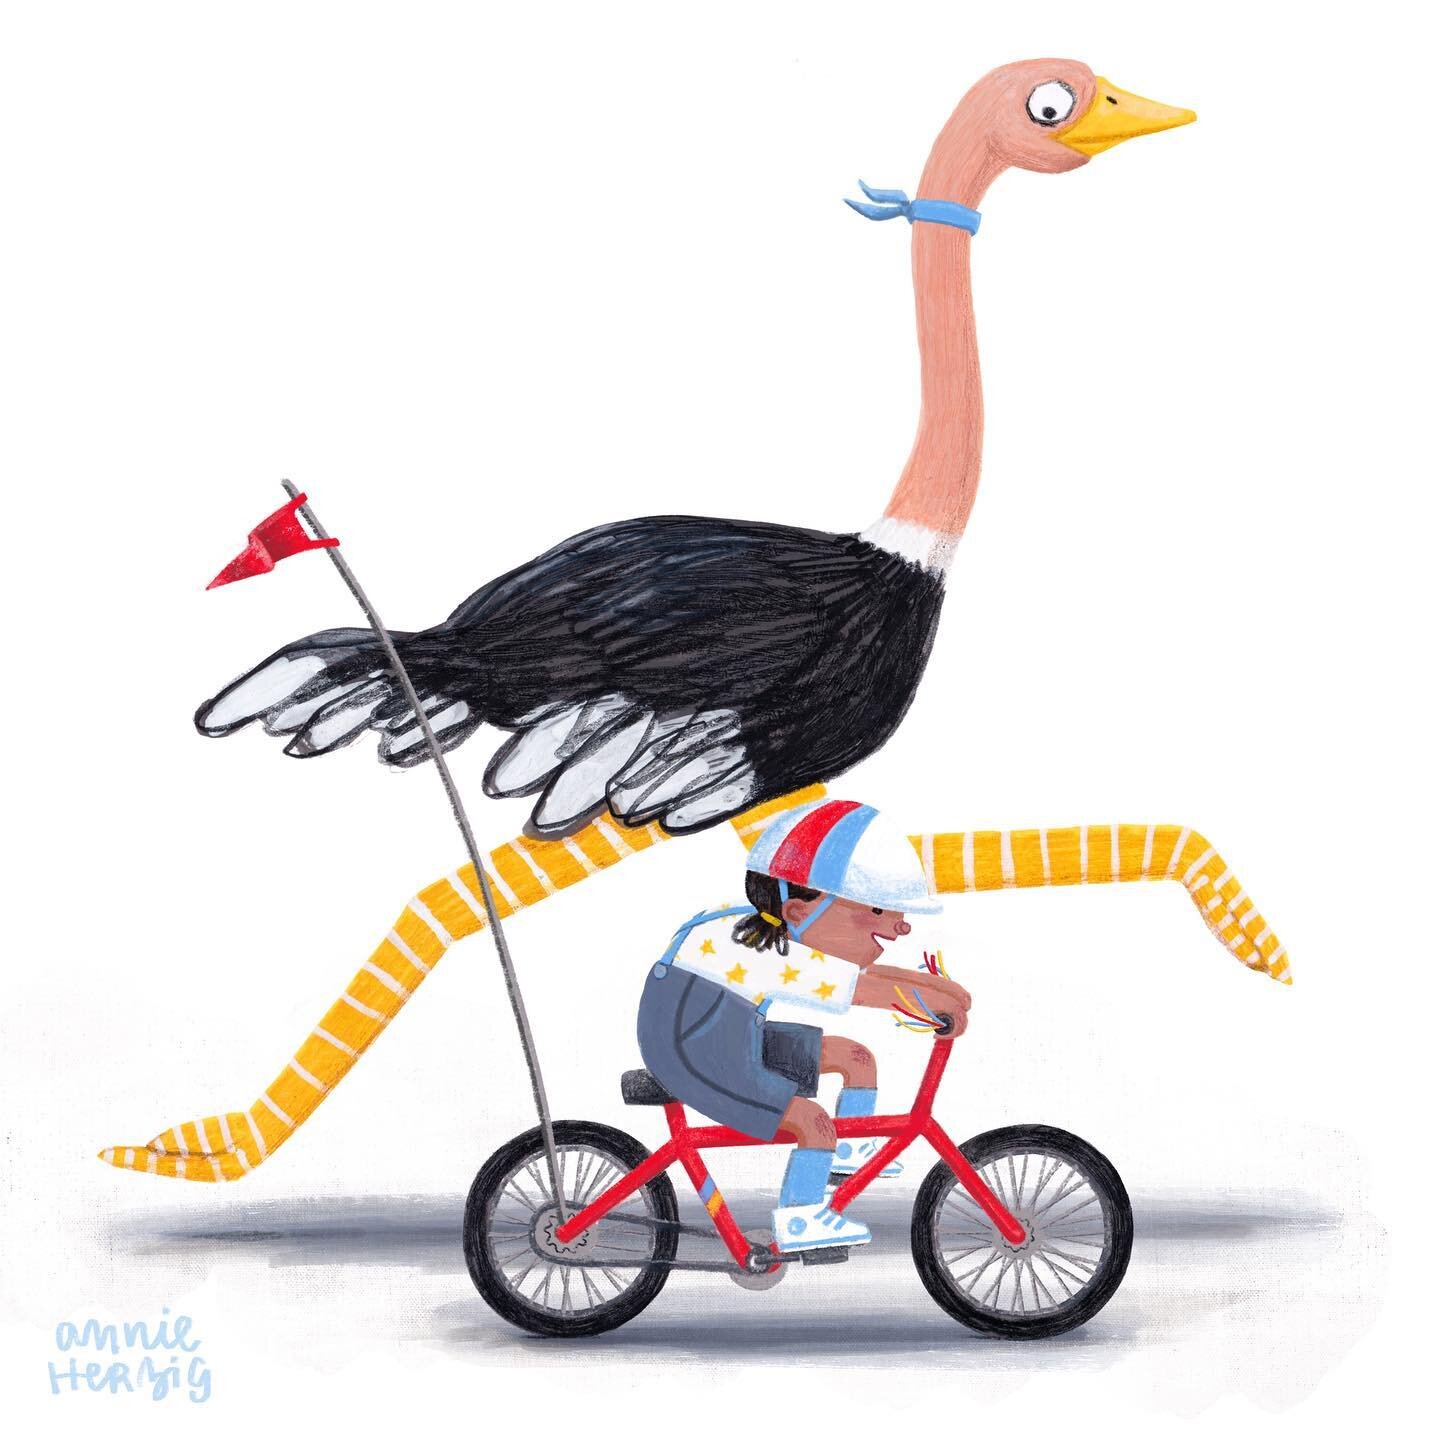 Ostrich pets need quite a lot of exercise as you can imagine. They have to stretch out those long stilts on which they stand.  Luckily Lyla is a very fast rider of bikes and takes Ozzy out for daily races up and down the block.